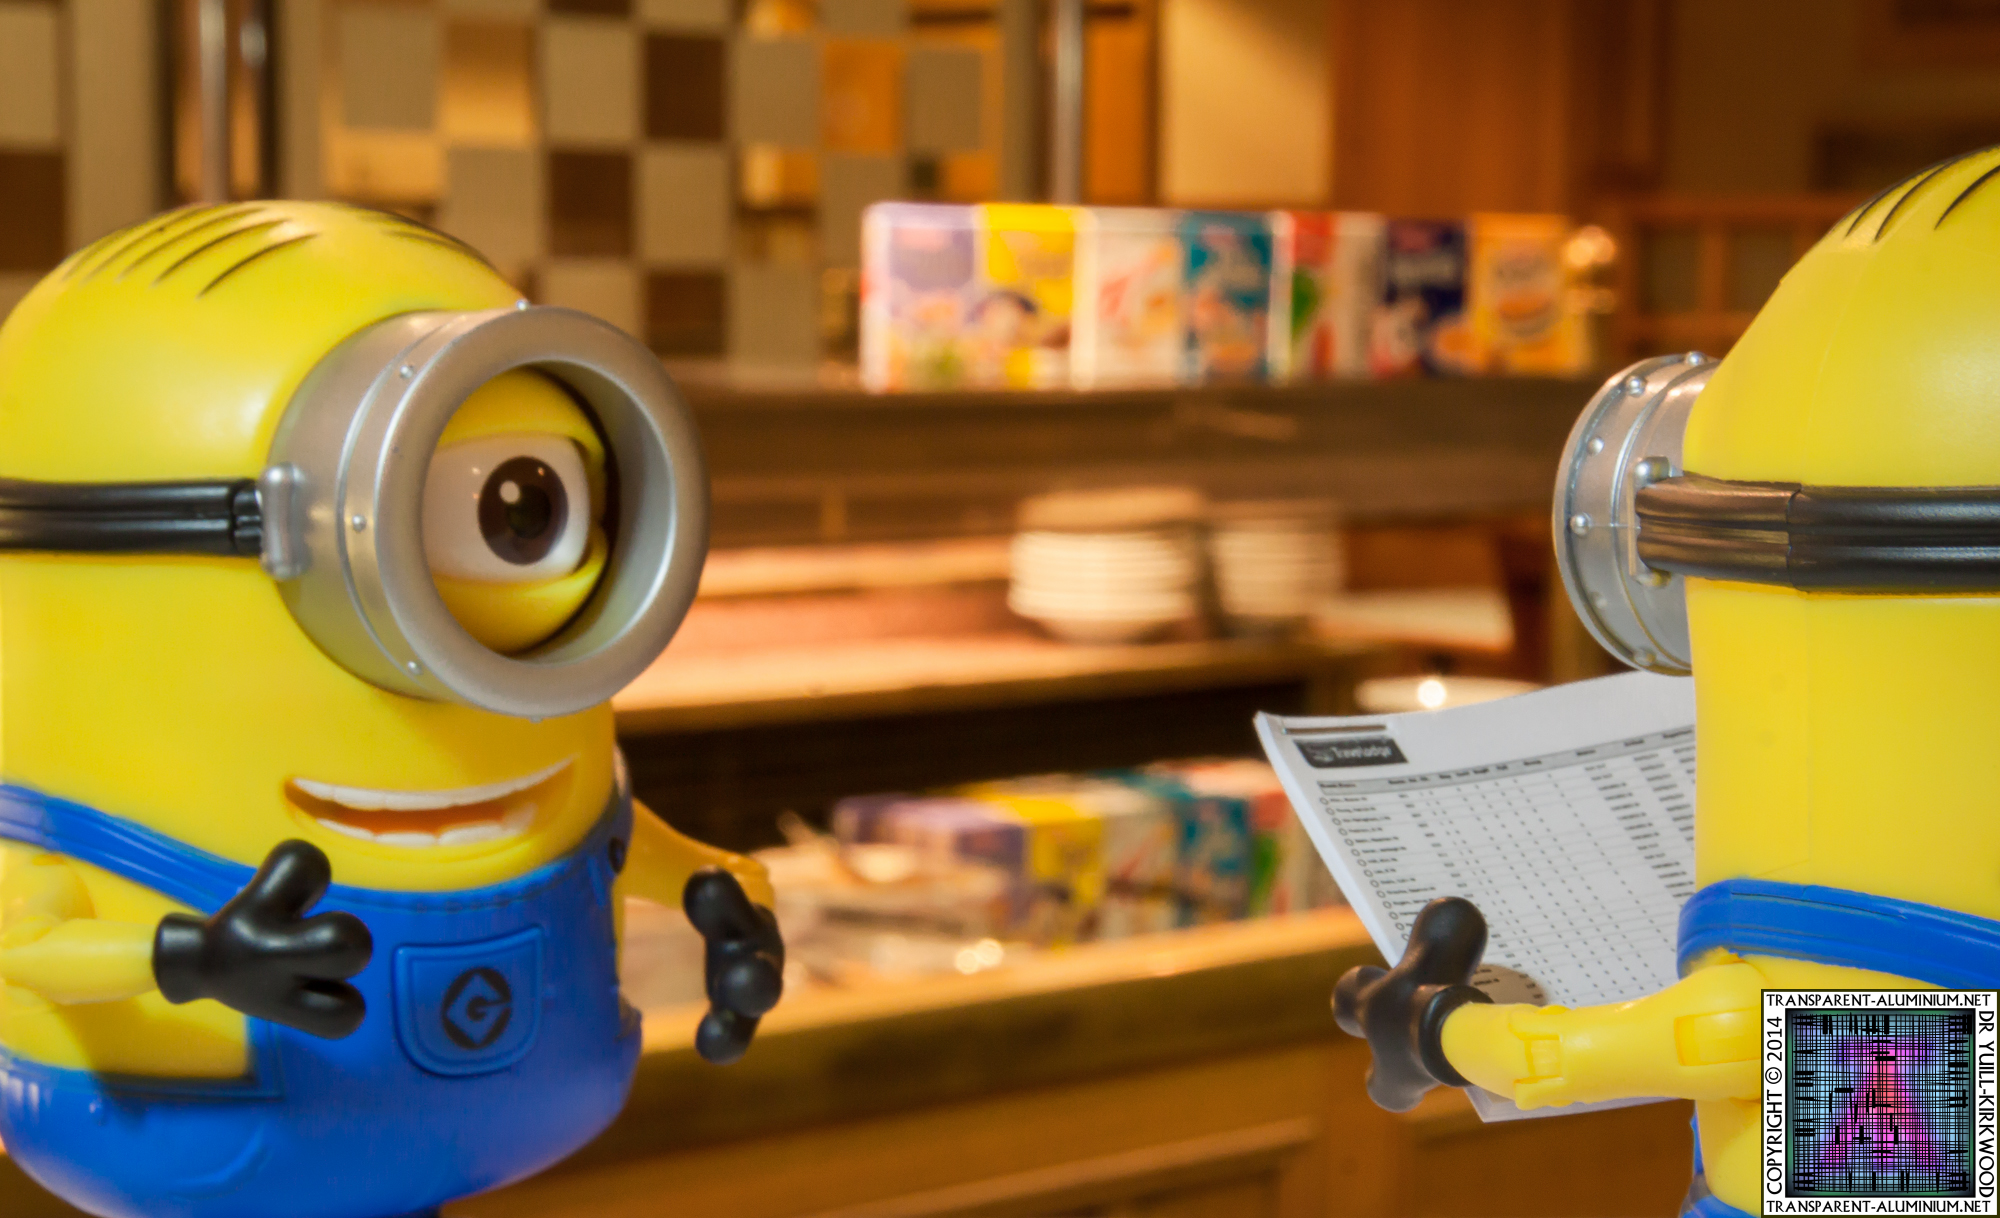 The Minions working breakfast time at the Silverlink Hotel.